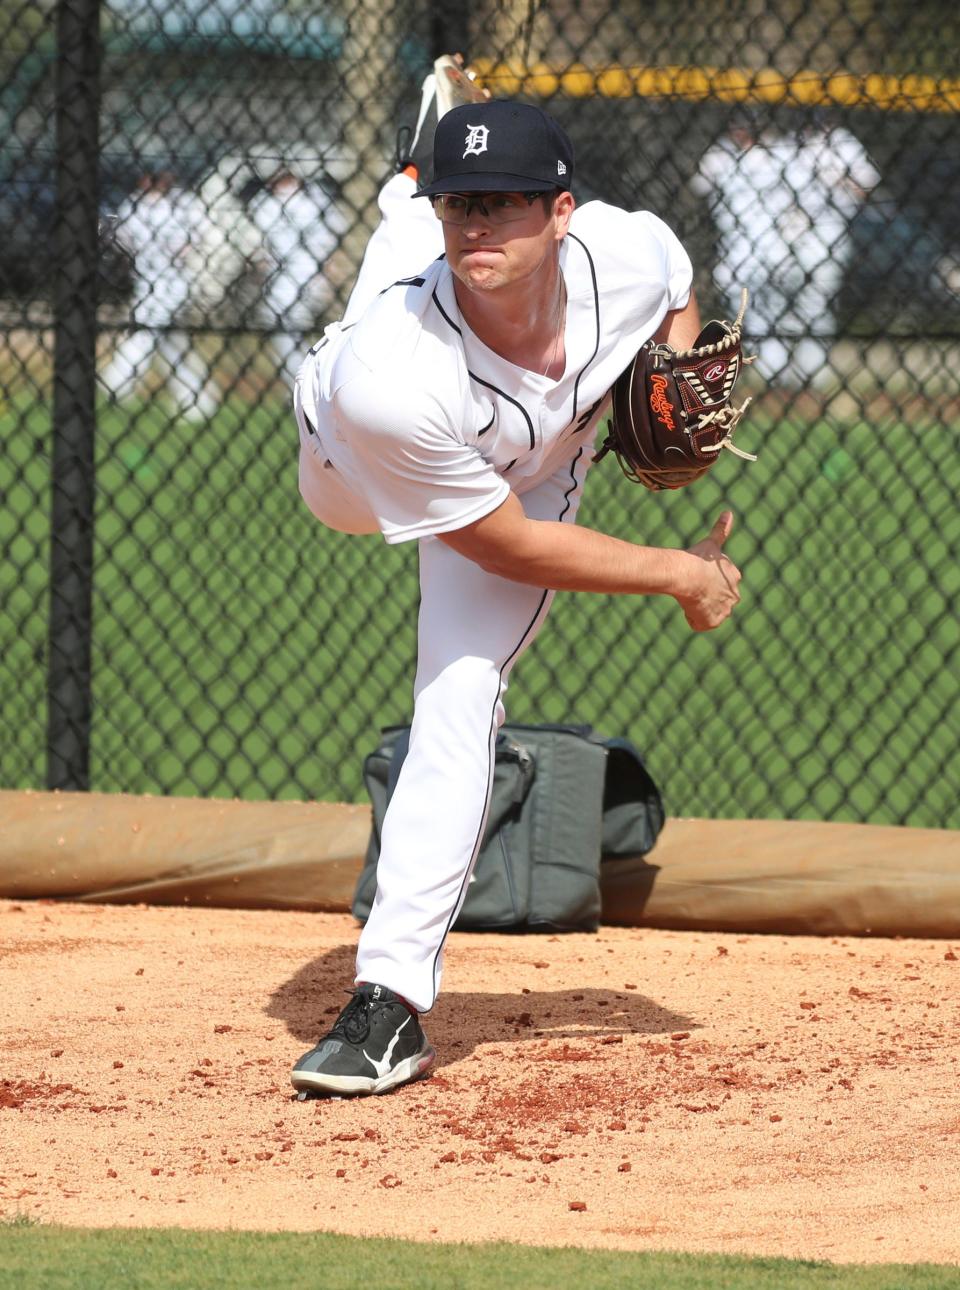 Tigers pitching prospect Garrett Hill throws during practice at the spring training minor league minicamp Thursday, Feb.17, 2022 at Tiger Town in Lakeland, Florida.